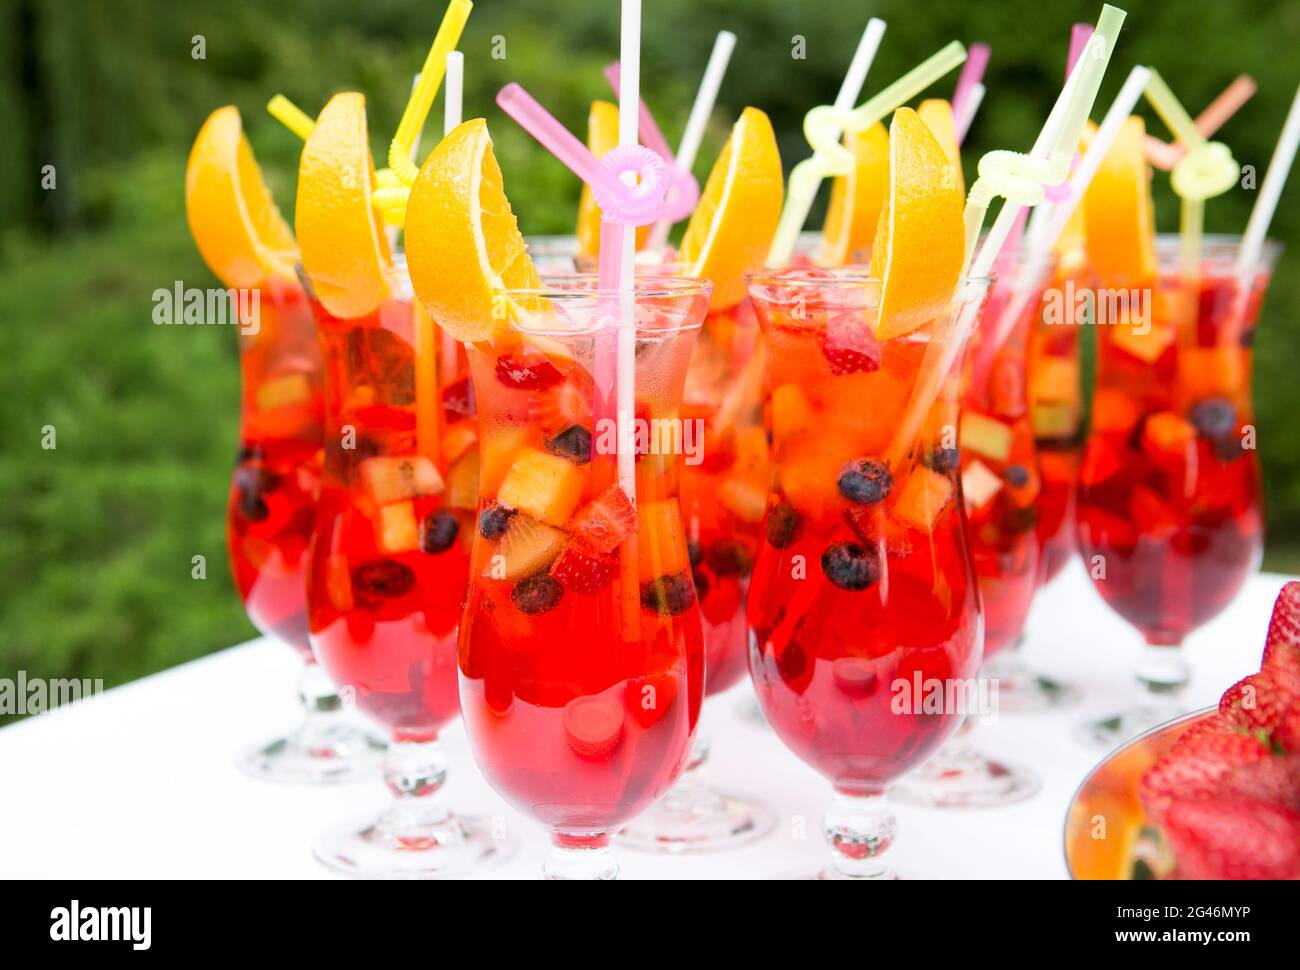 A beautifully presented welcome drink - a glass of Prosecco or champagne  with fruit inside. Served as a welcome drink at a party, event, wedding  recep Stock Photo - Alamy